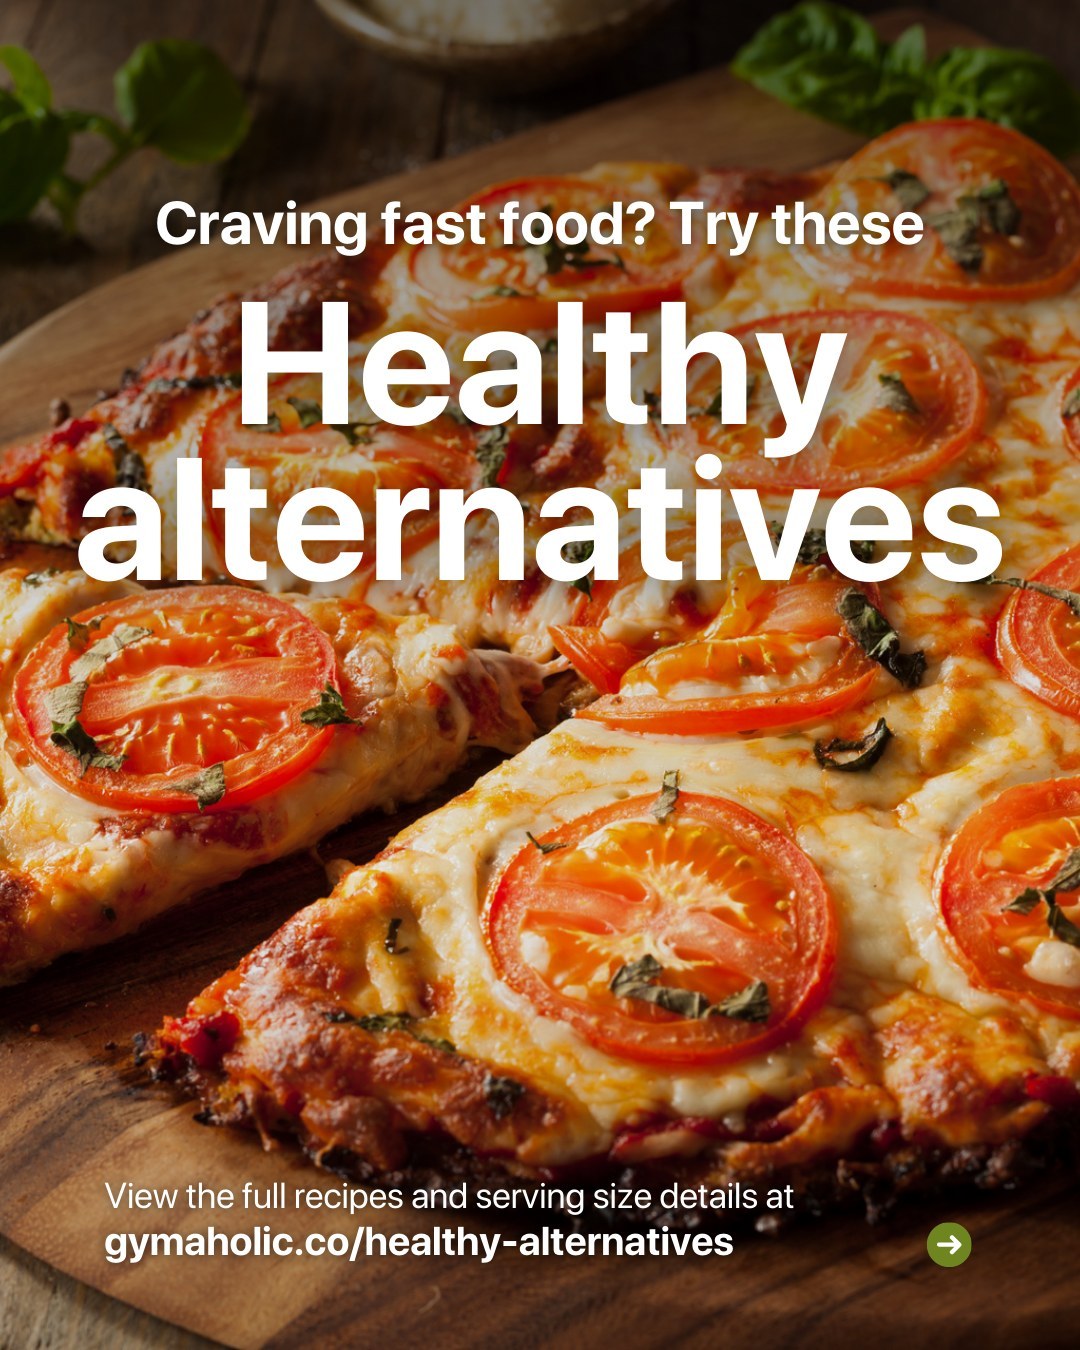 Craving fast food? Try these healthy alternatives.